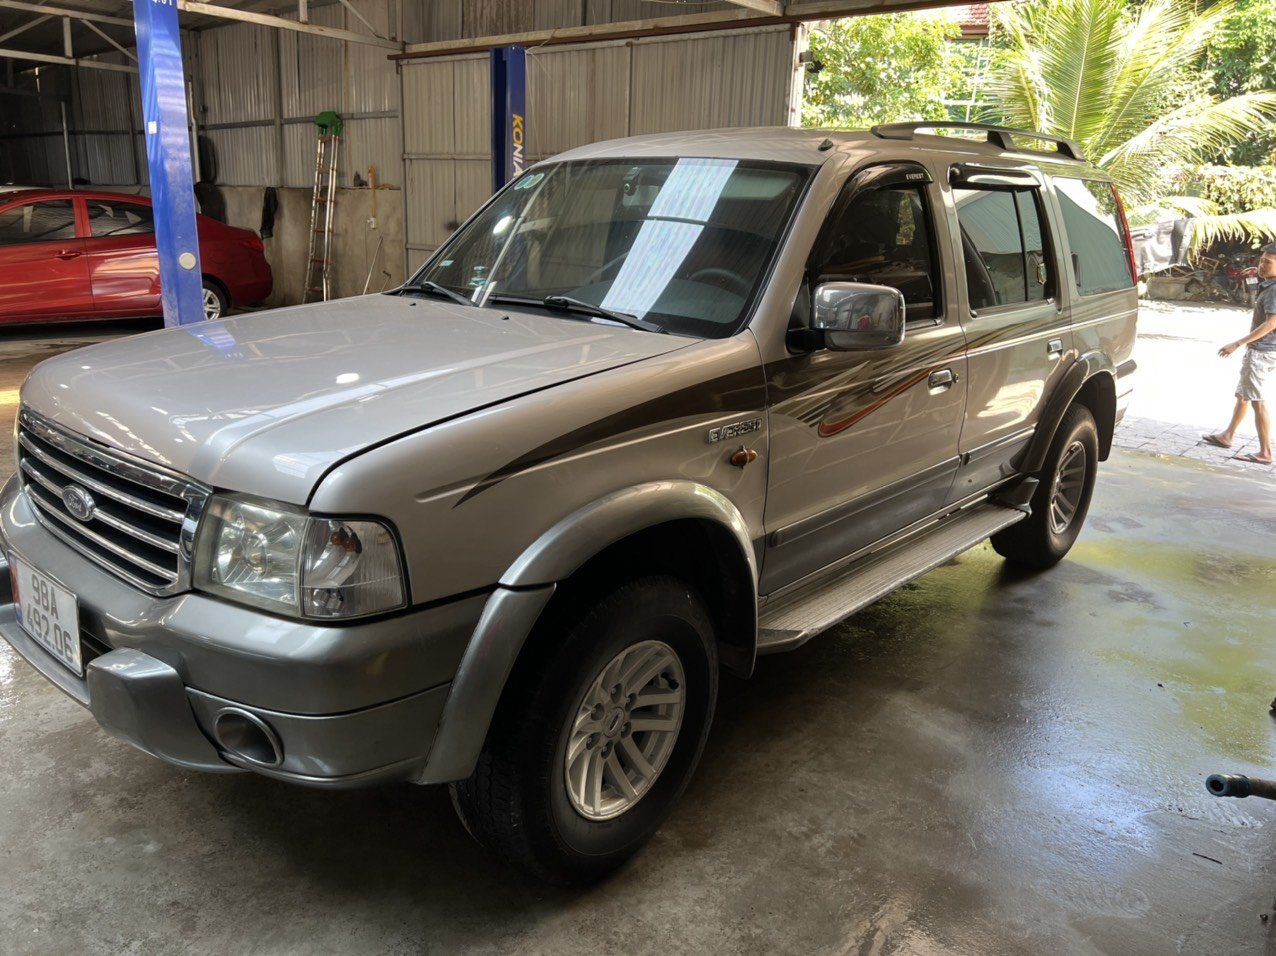 Bán xe Ford Everest 2005